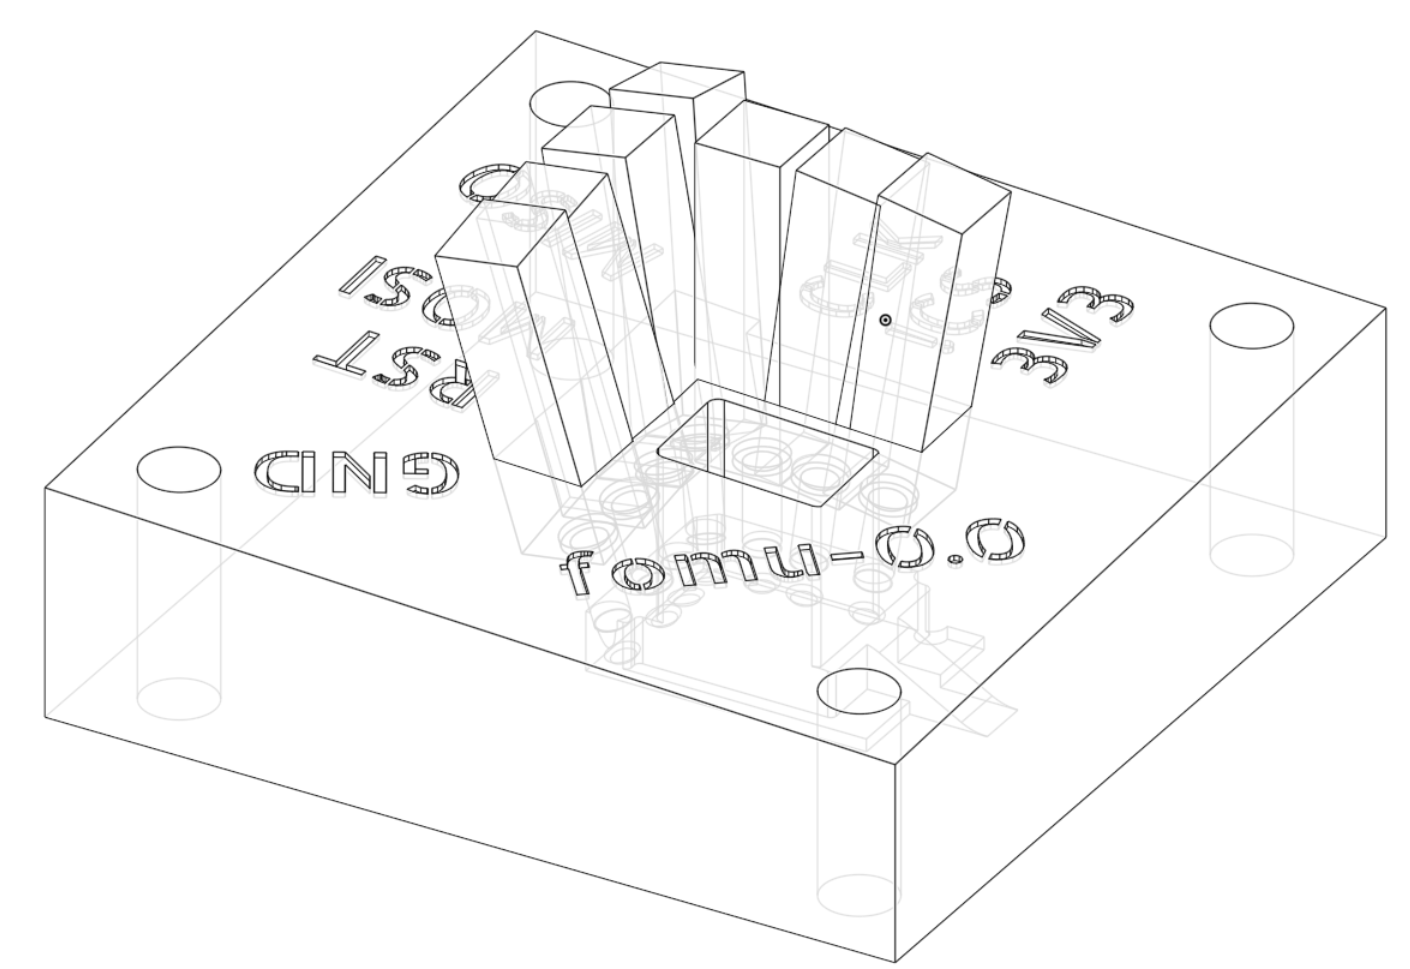 Isometric view with all edges visible